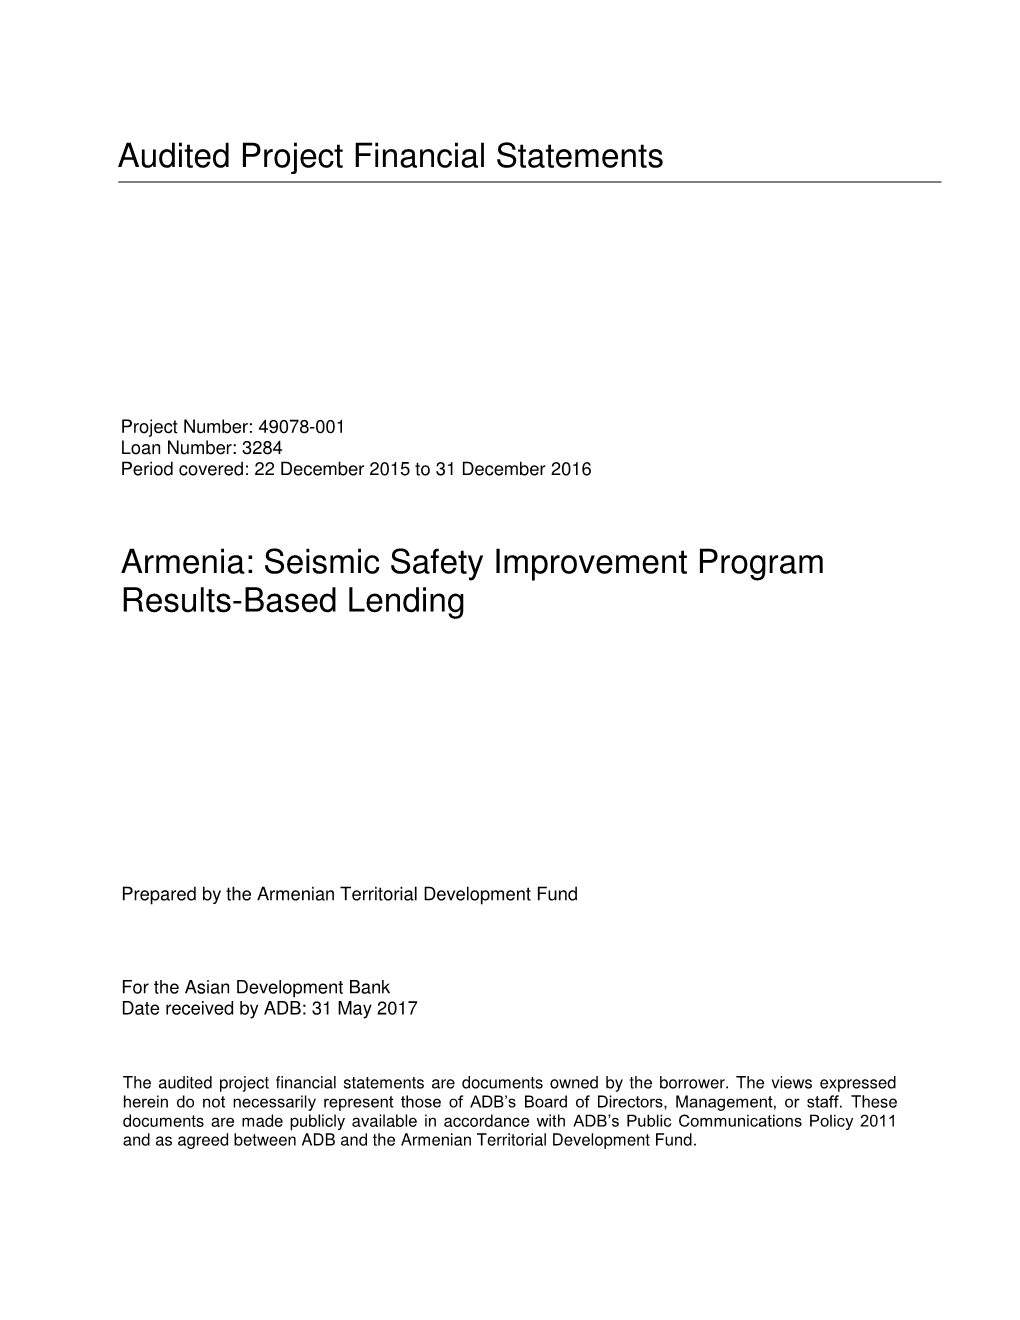 Audited Project Financial Statements Armenia